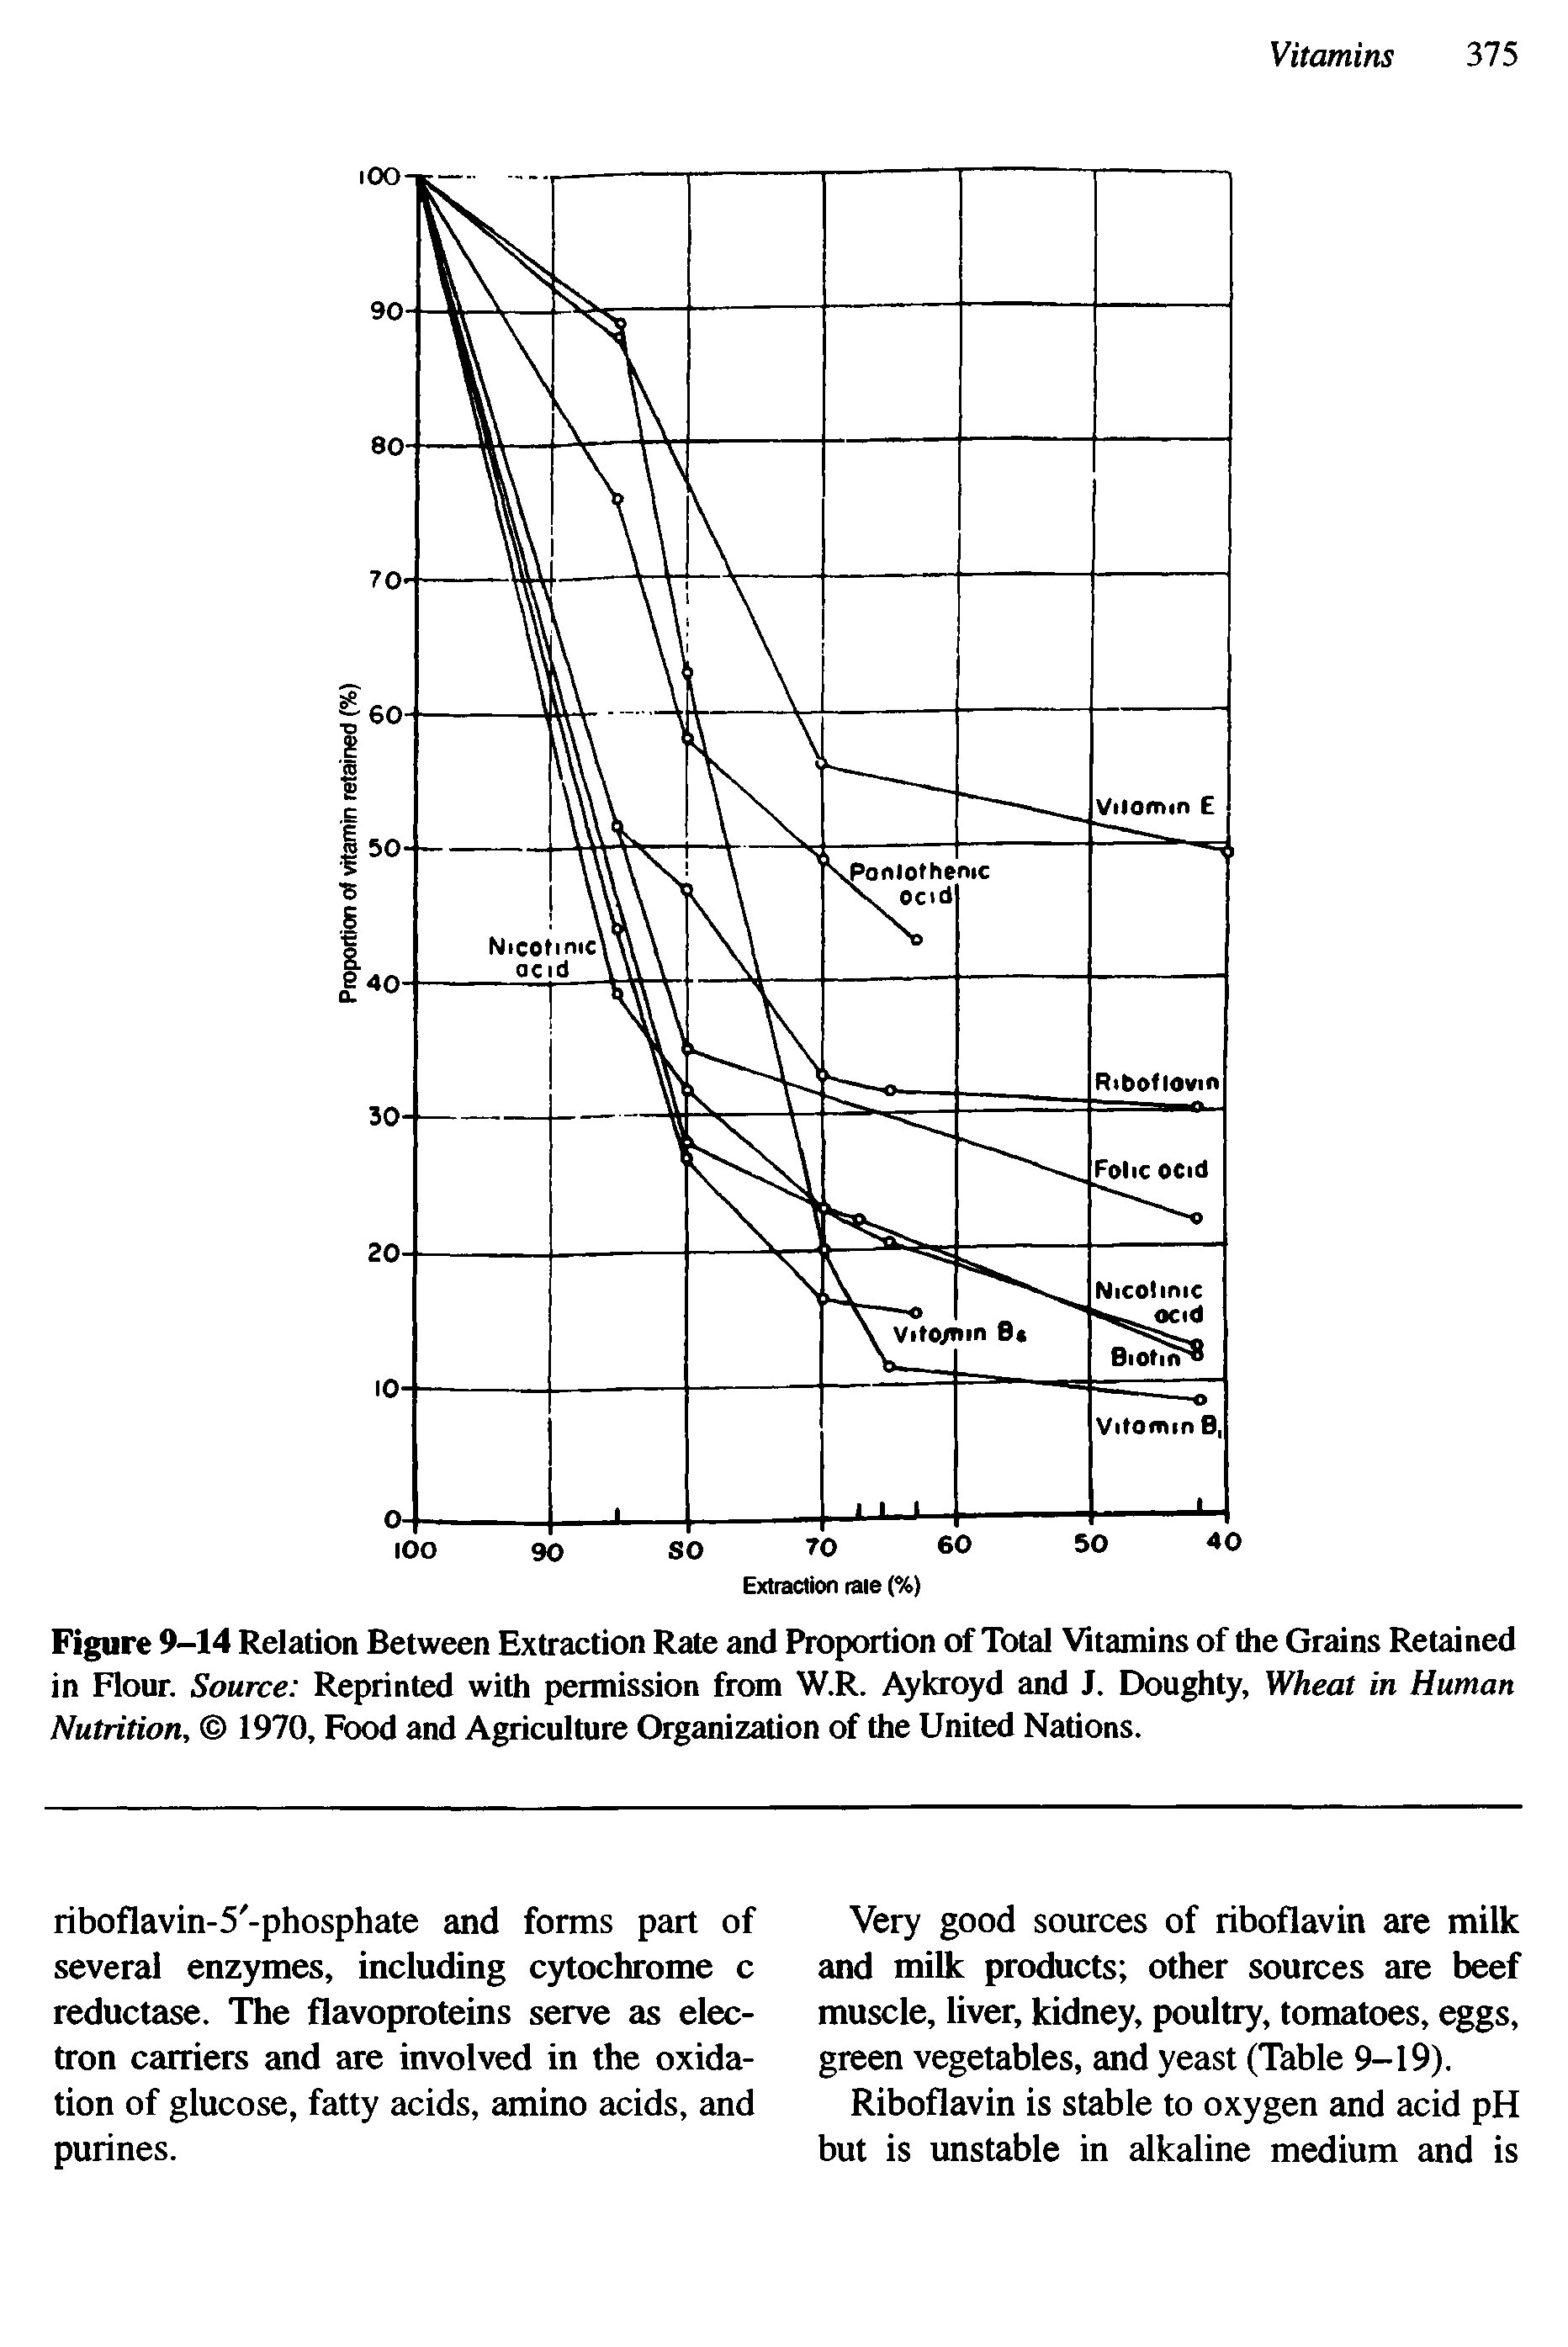 Figure 9-14 Relation Between Extraction Rate and Proportion of Total Vitamins of the Grains Retained in Flour. Source Reprinted with permission from W.R. Aykroyd and J. Doughty, Wheat in Human Nutrition, 1970, Food and Agriculture Organization of the United Nations.